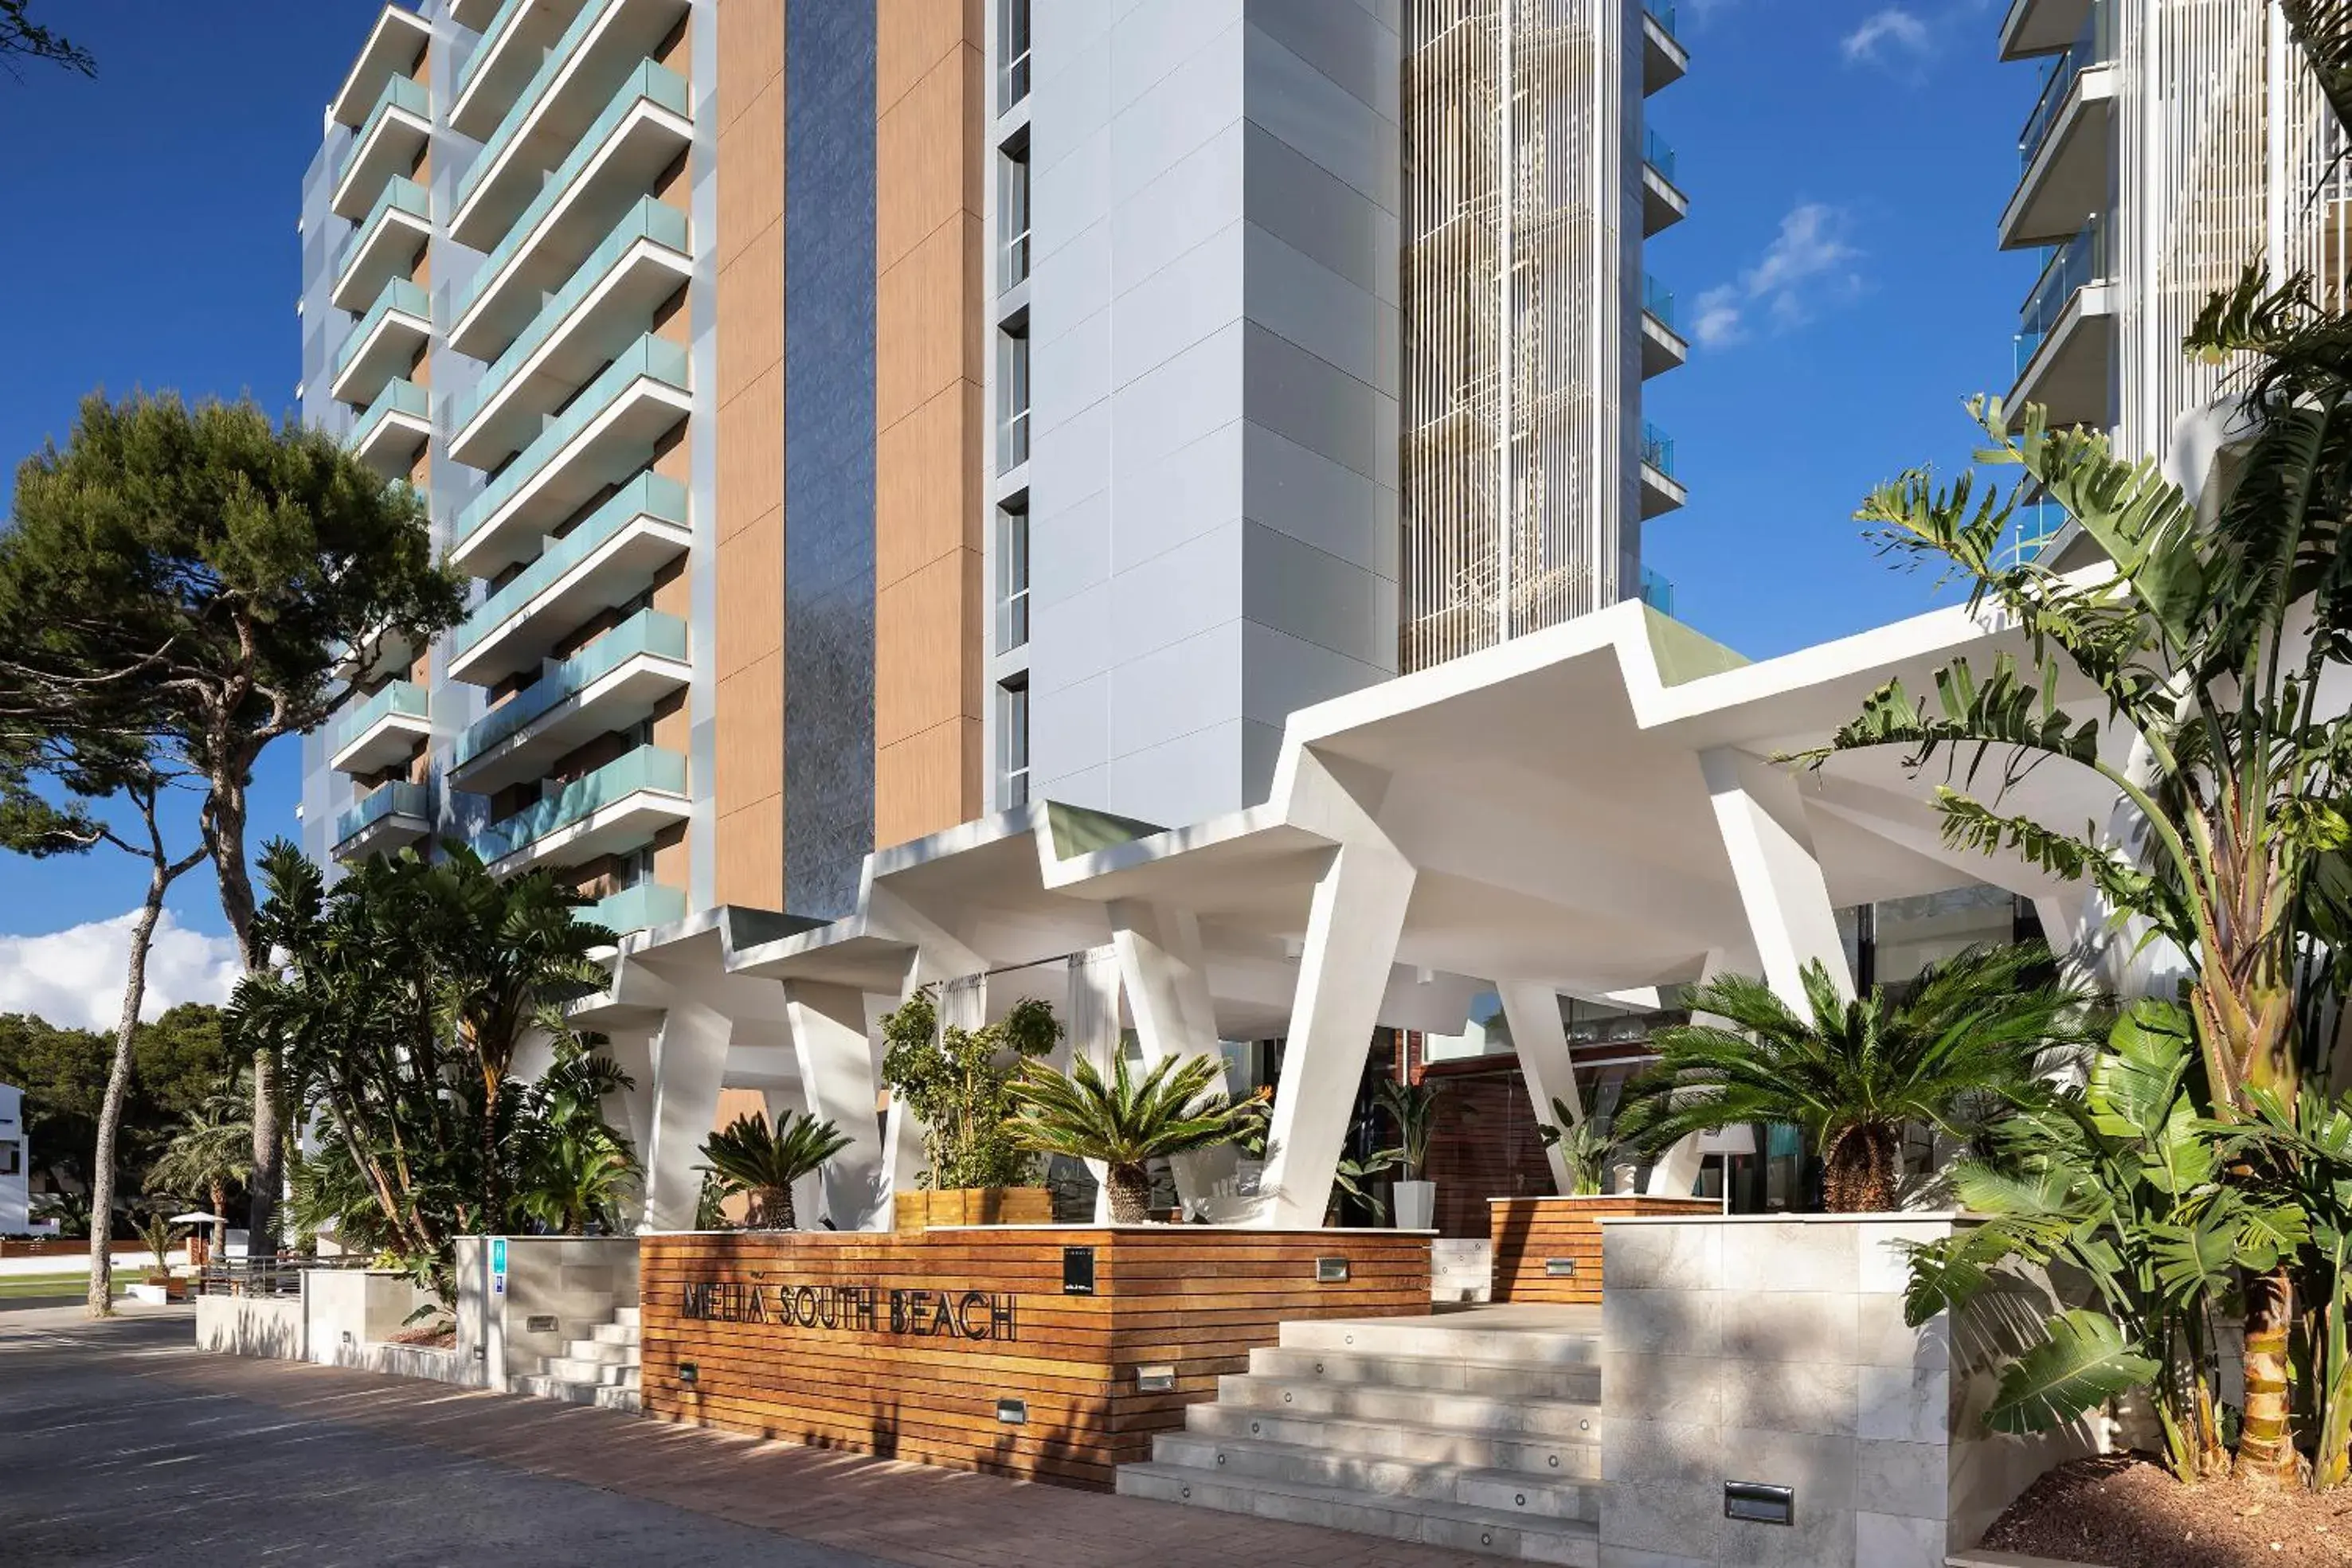 Property Building in Melia South Beach